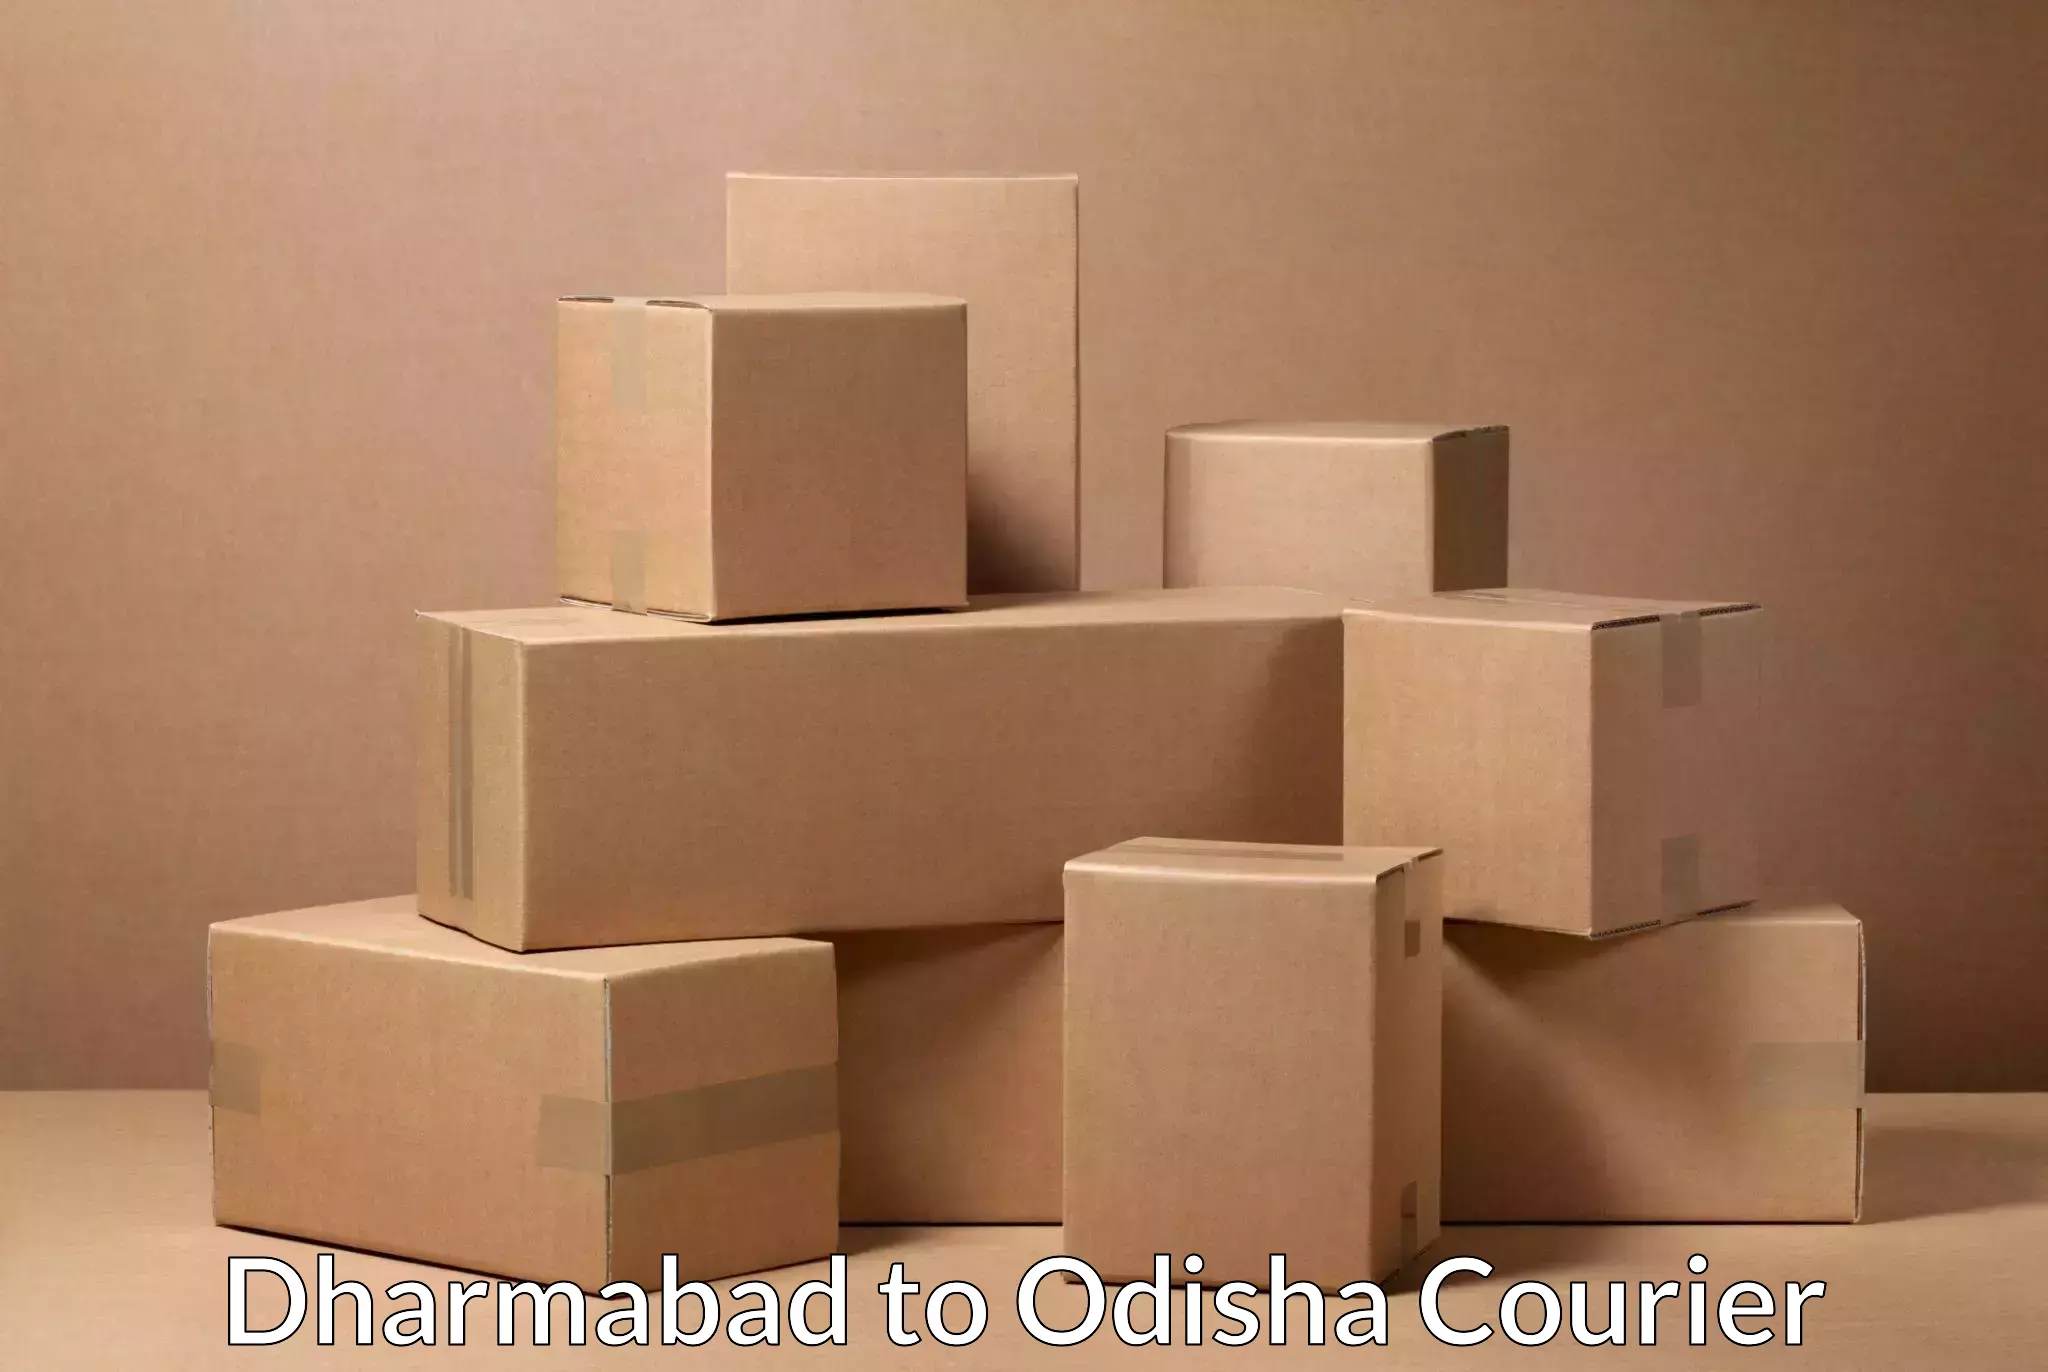 Professional courier services in Dharmabad to Bheden